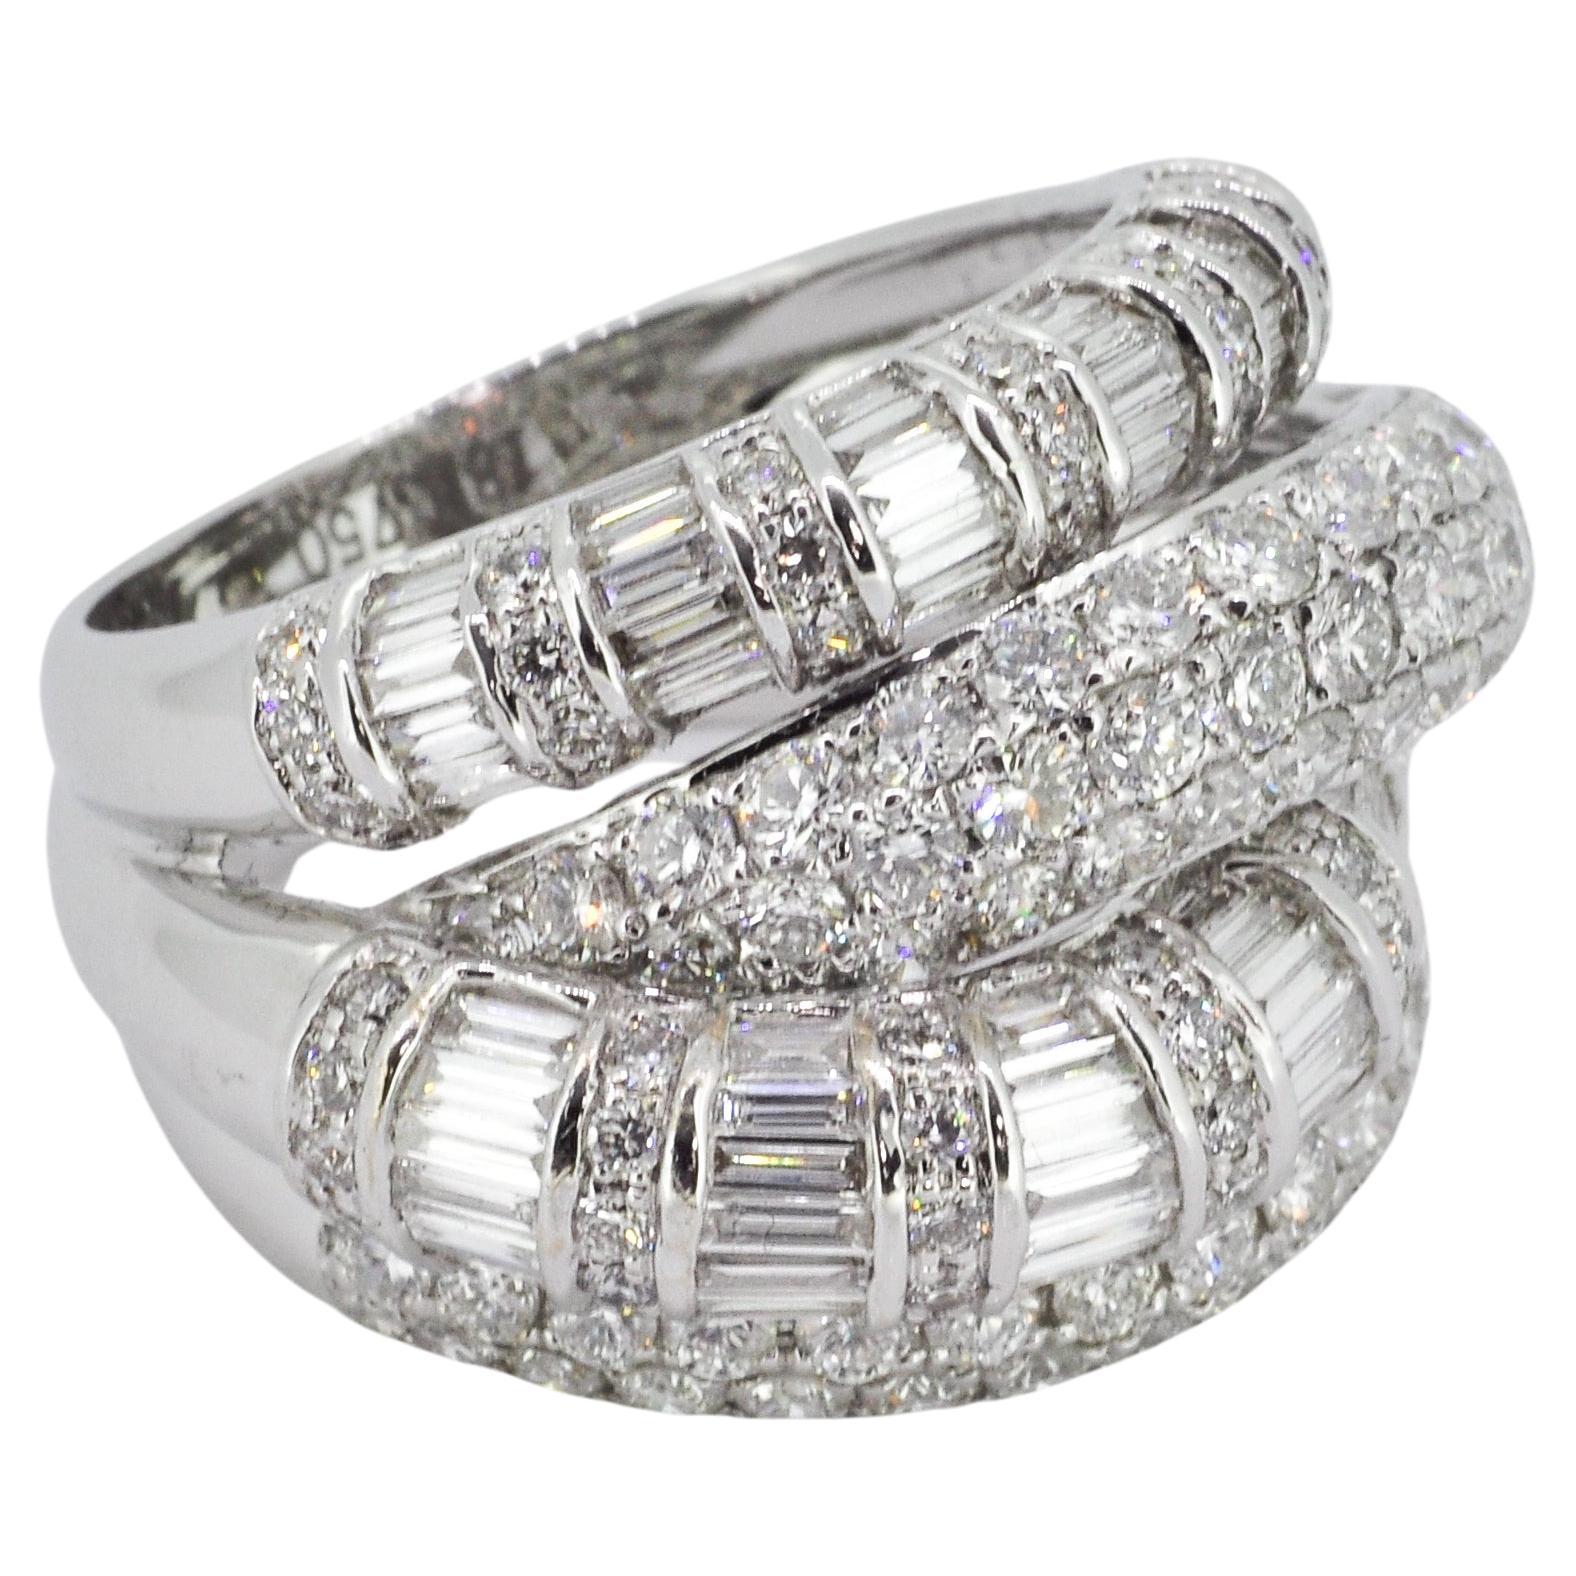 This statement-making white gold ring is a true testament to the artistry of jewelry design. Crafted from 18k white gold, it features bold settings of round and baguette diamonds that impart light-catching sparkle from every angle. With a total